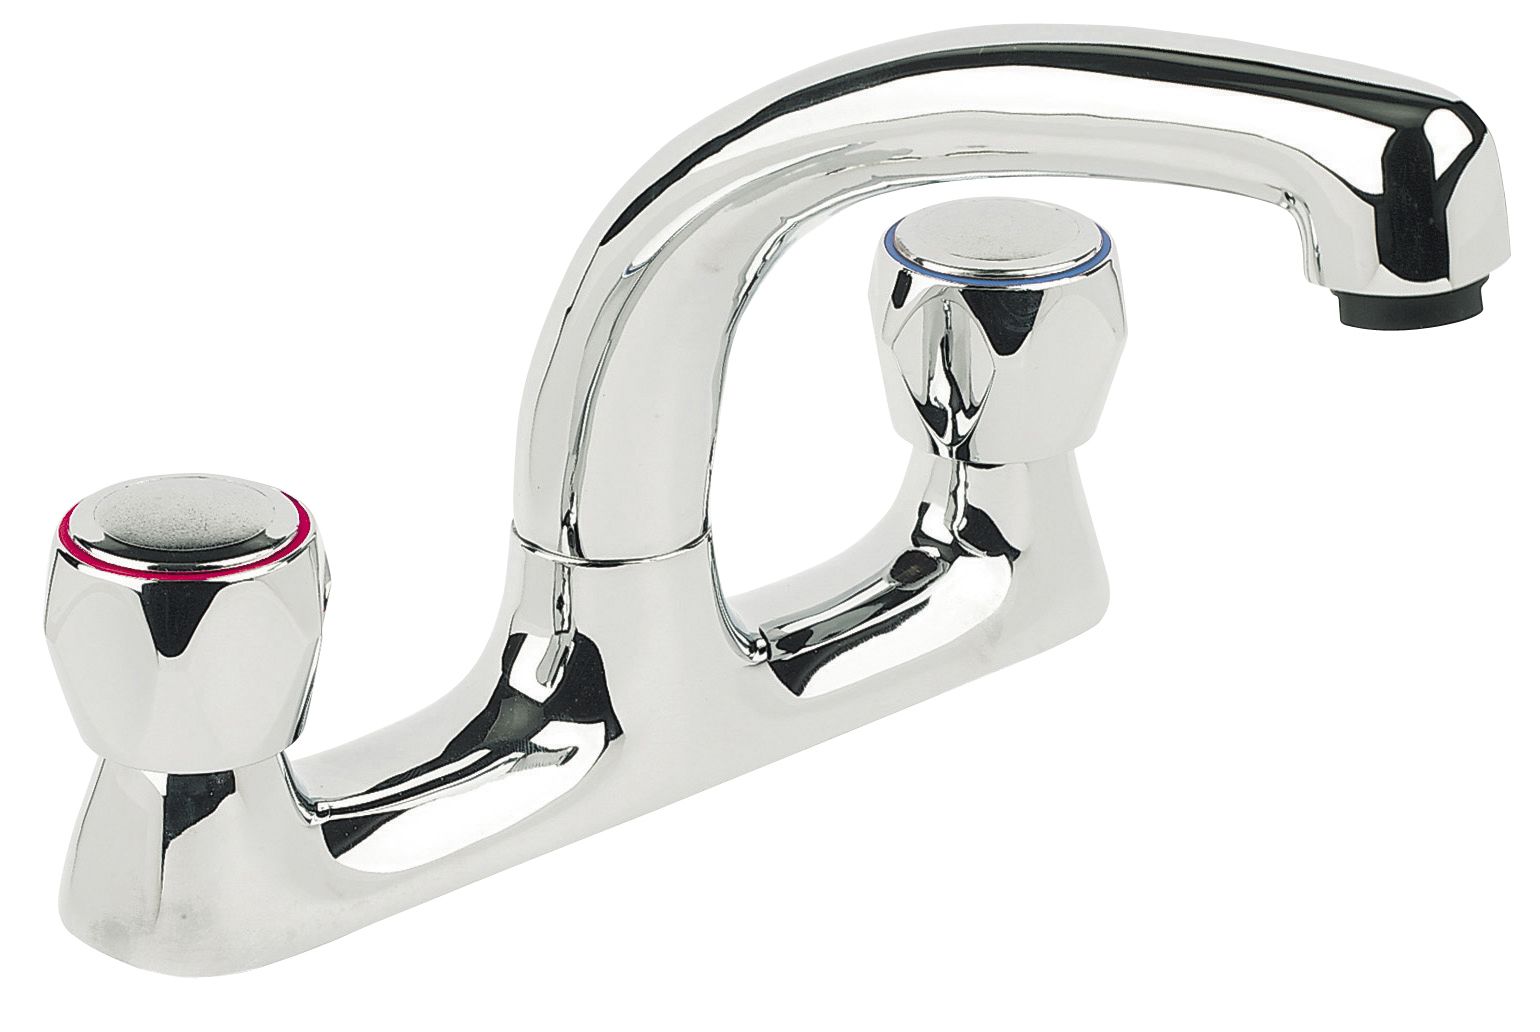 Swirl Contract Chrome Kitchen Sink Mixer Tap